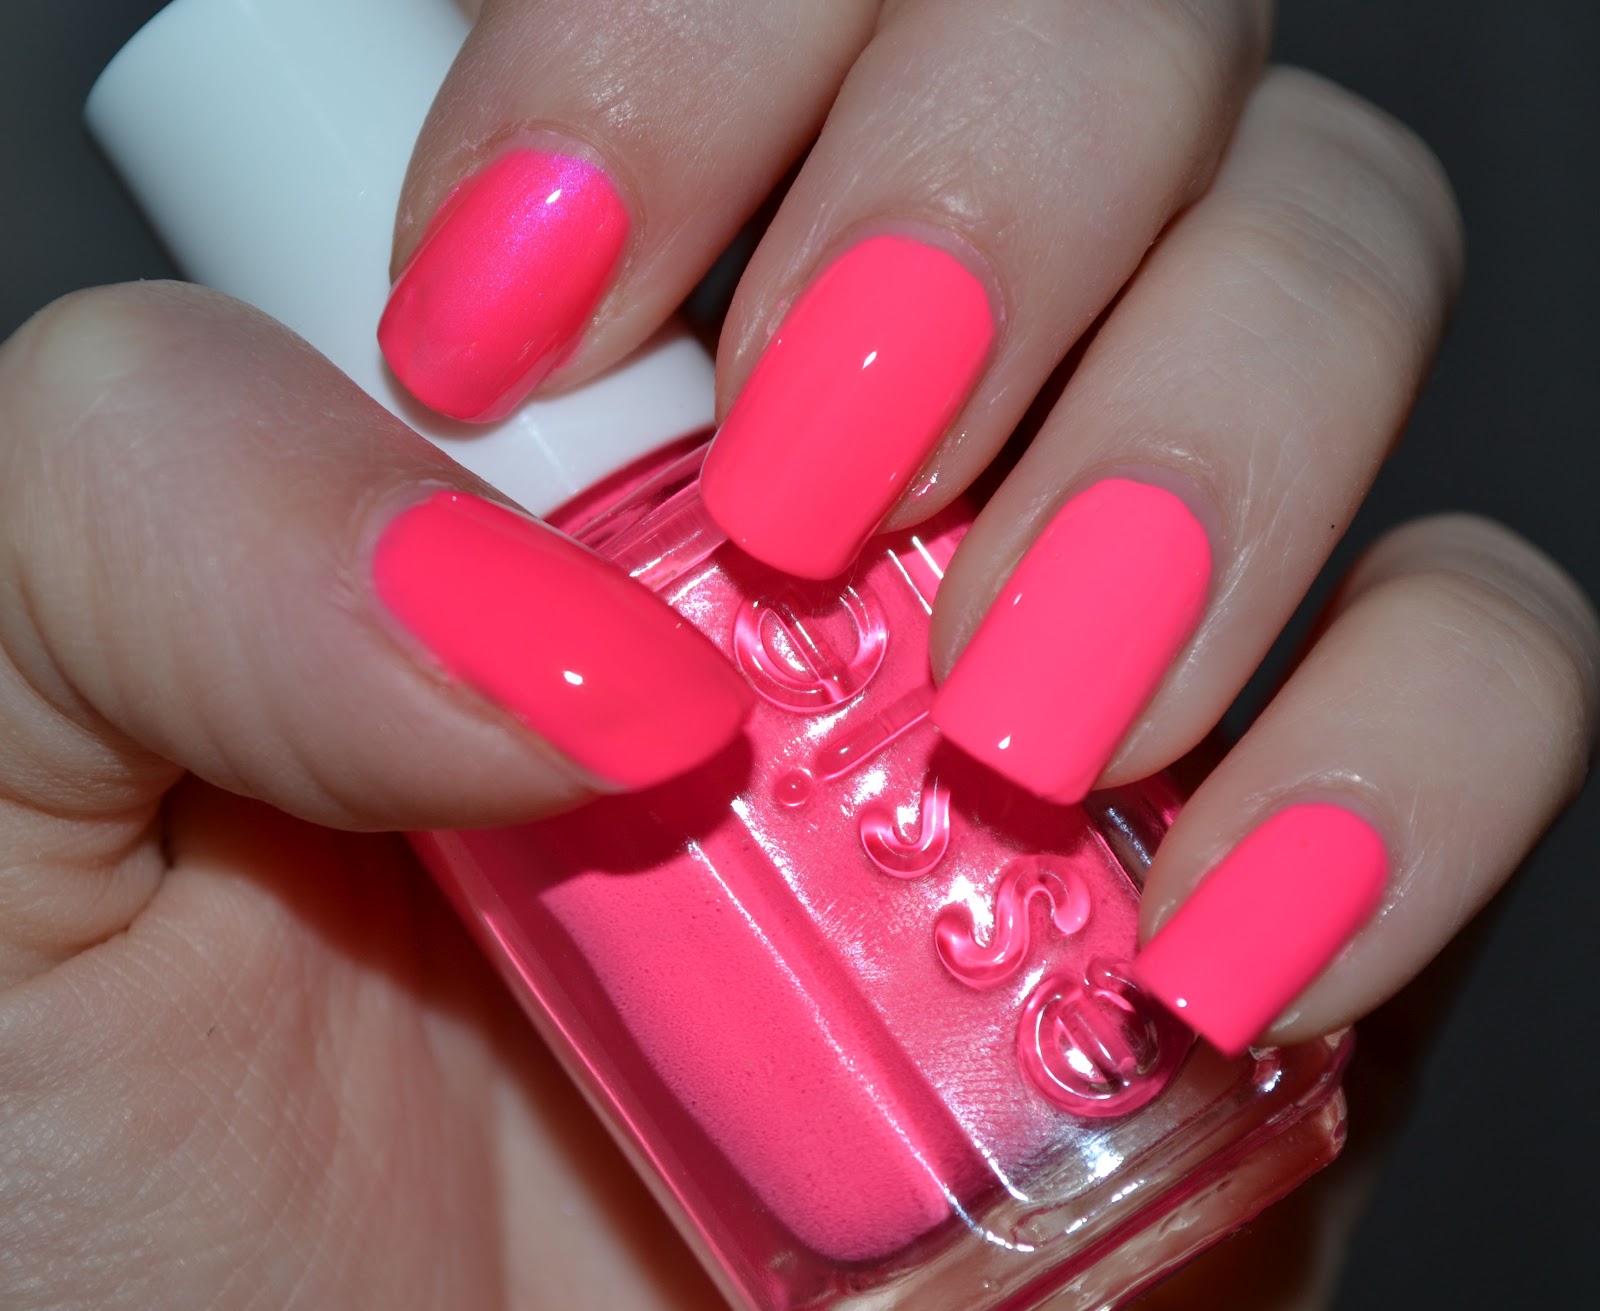 MakeUpVitamins: Essie Punchy Pink 694 Swatch, Review & Dupes